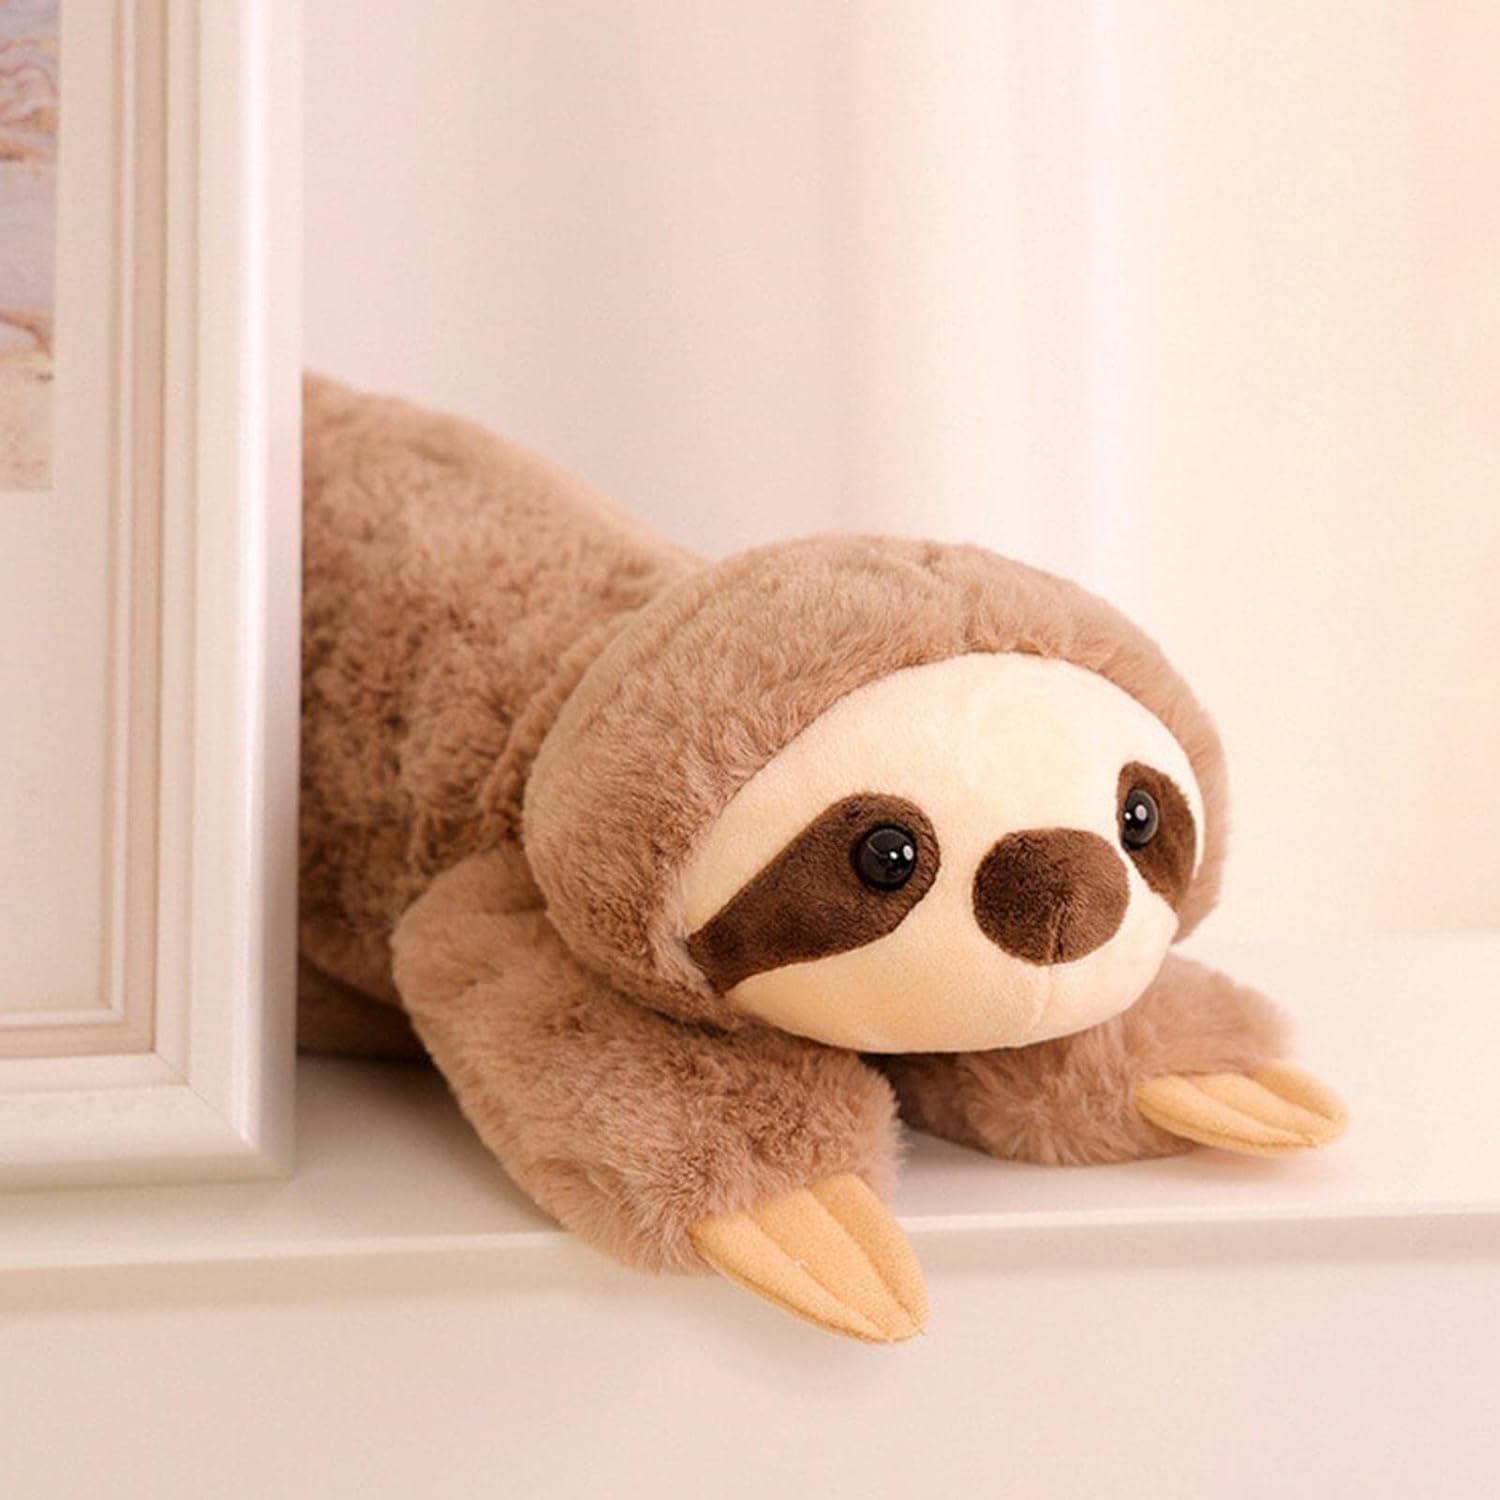 Relaxing with CozyBuddy™ Weighted Sloth Stuffed Animal to reduce stress and improve sleep